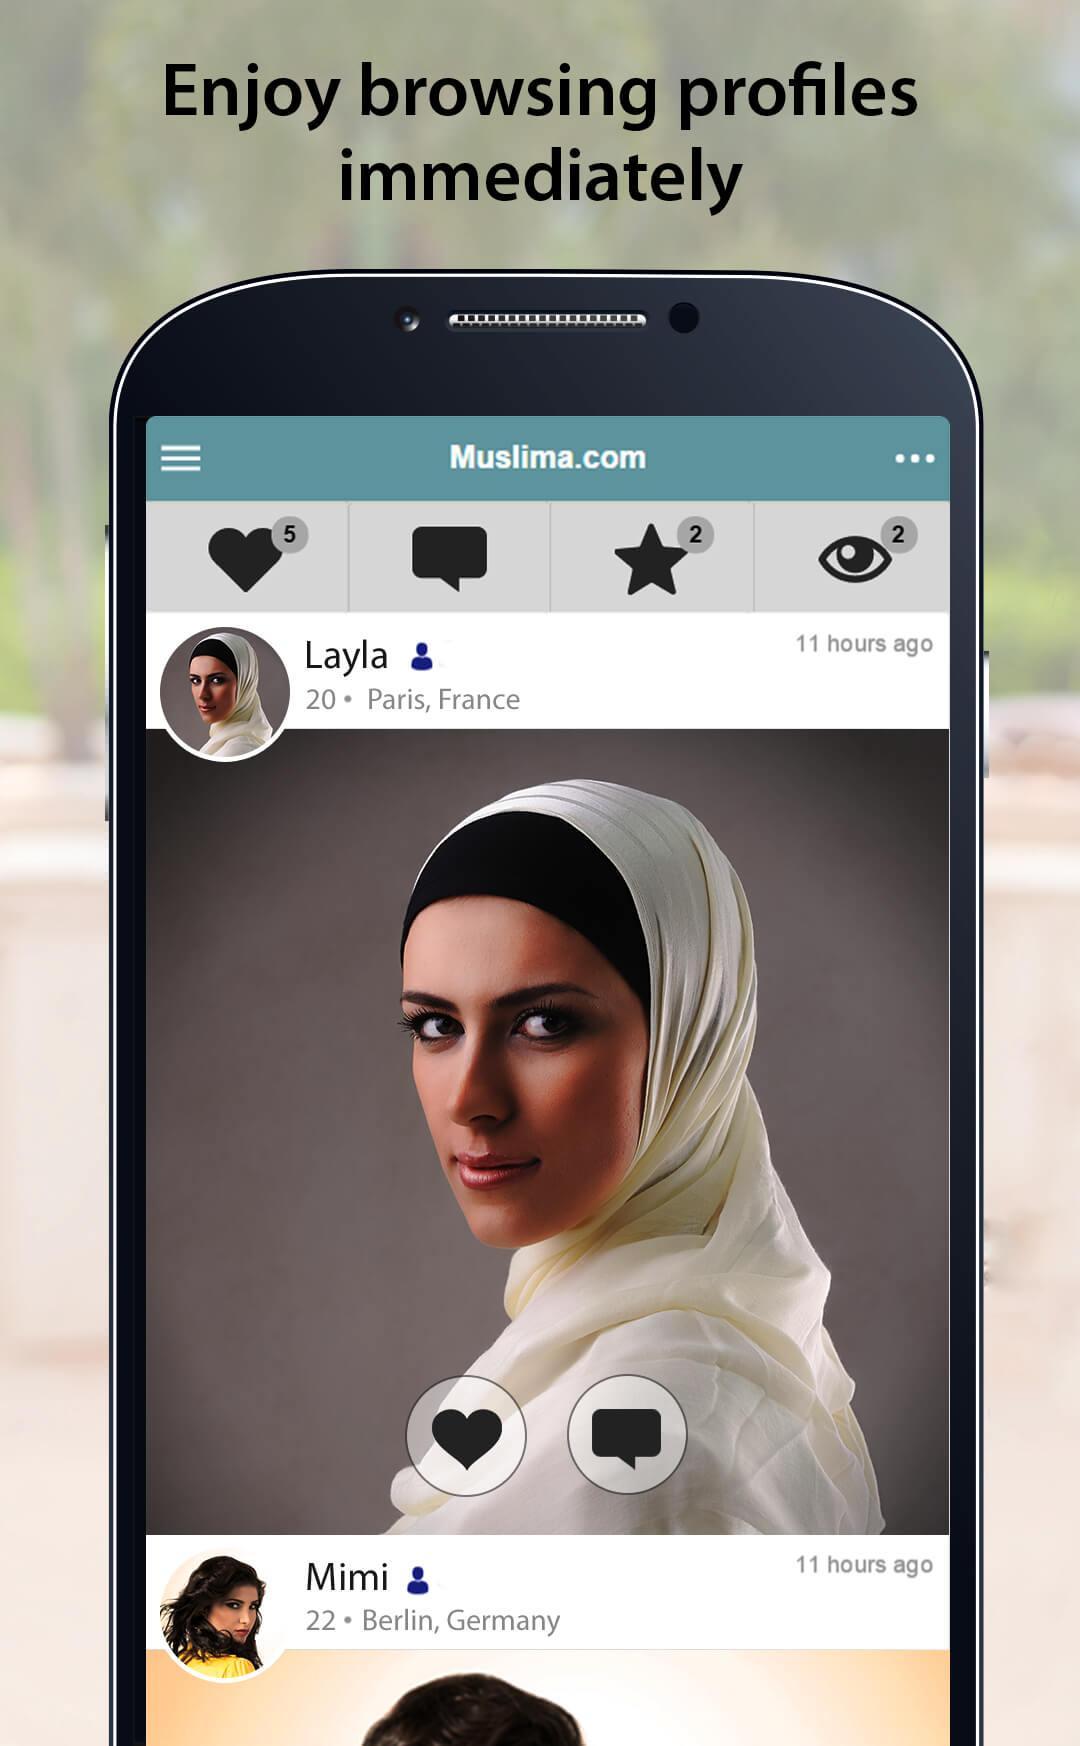 A muslim woman on muslima.com app together with her name, age, and the place where she lives in